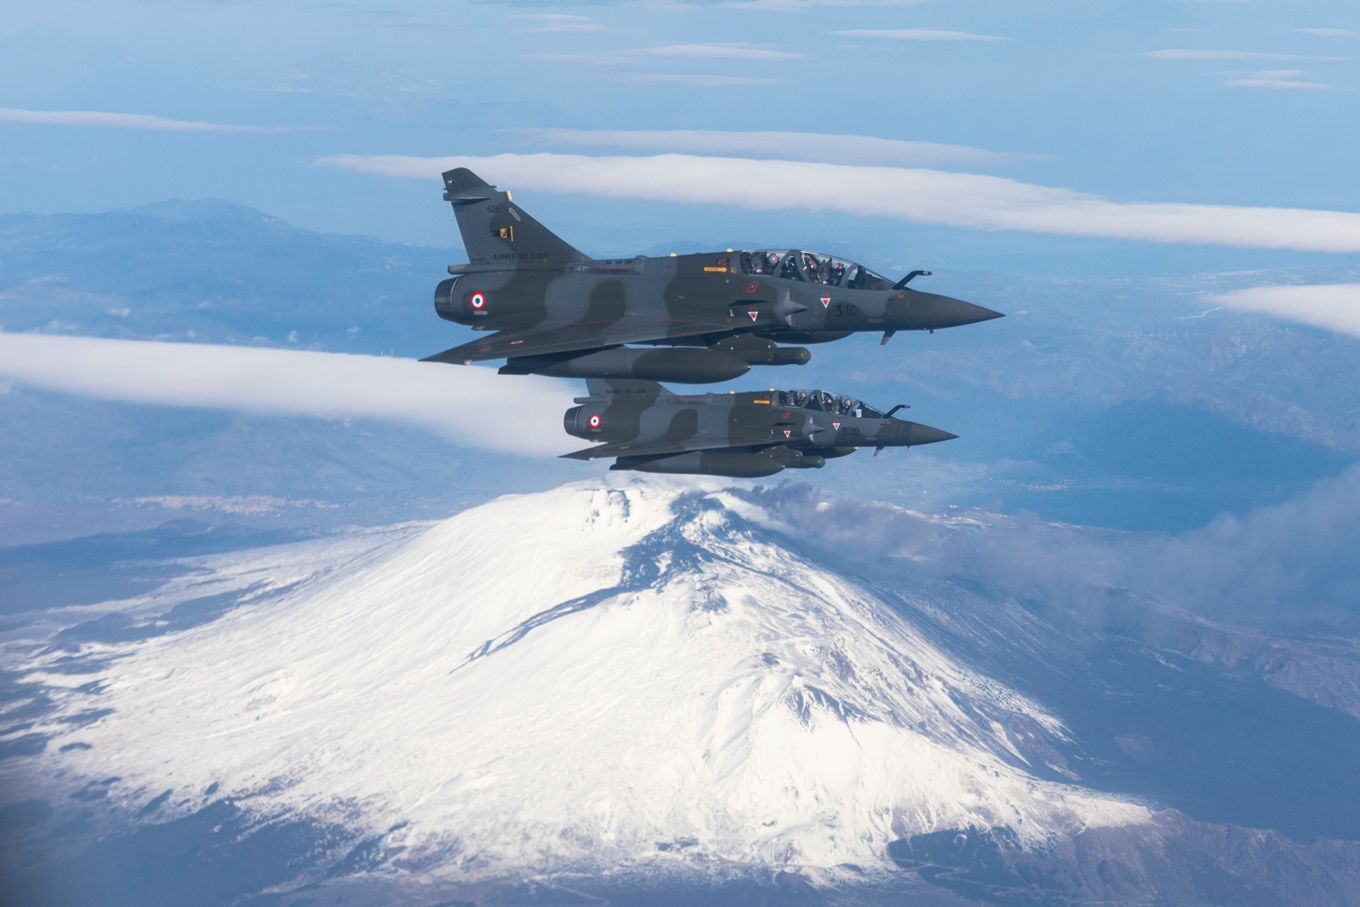 Image shows two French Mirage 2000 aircraft flying.